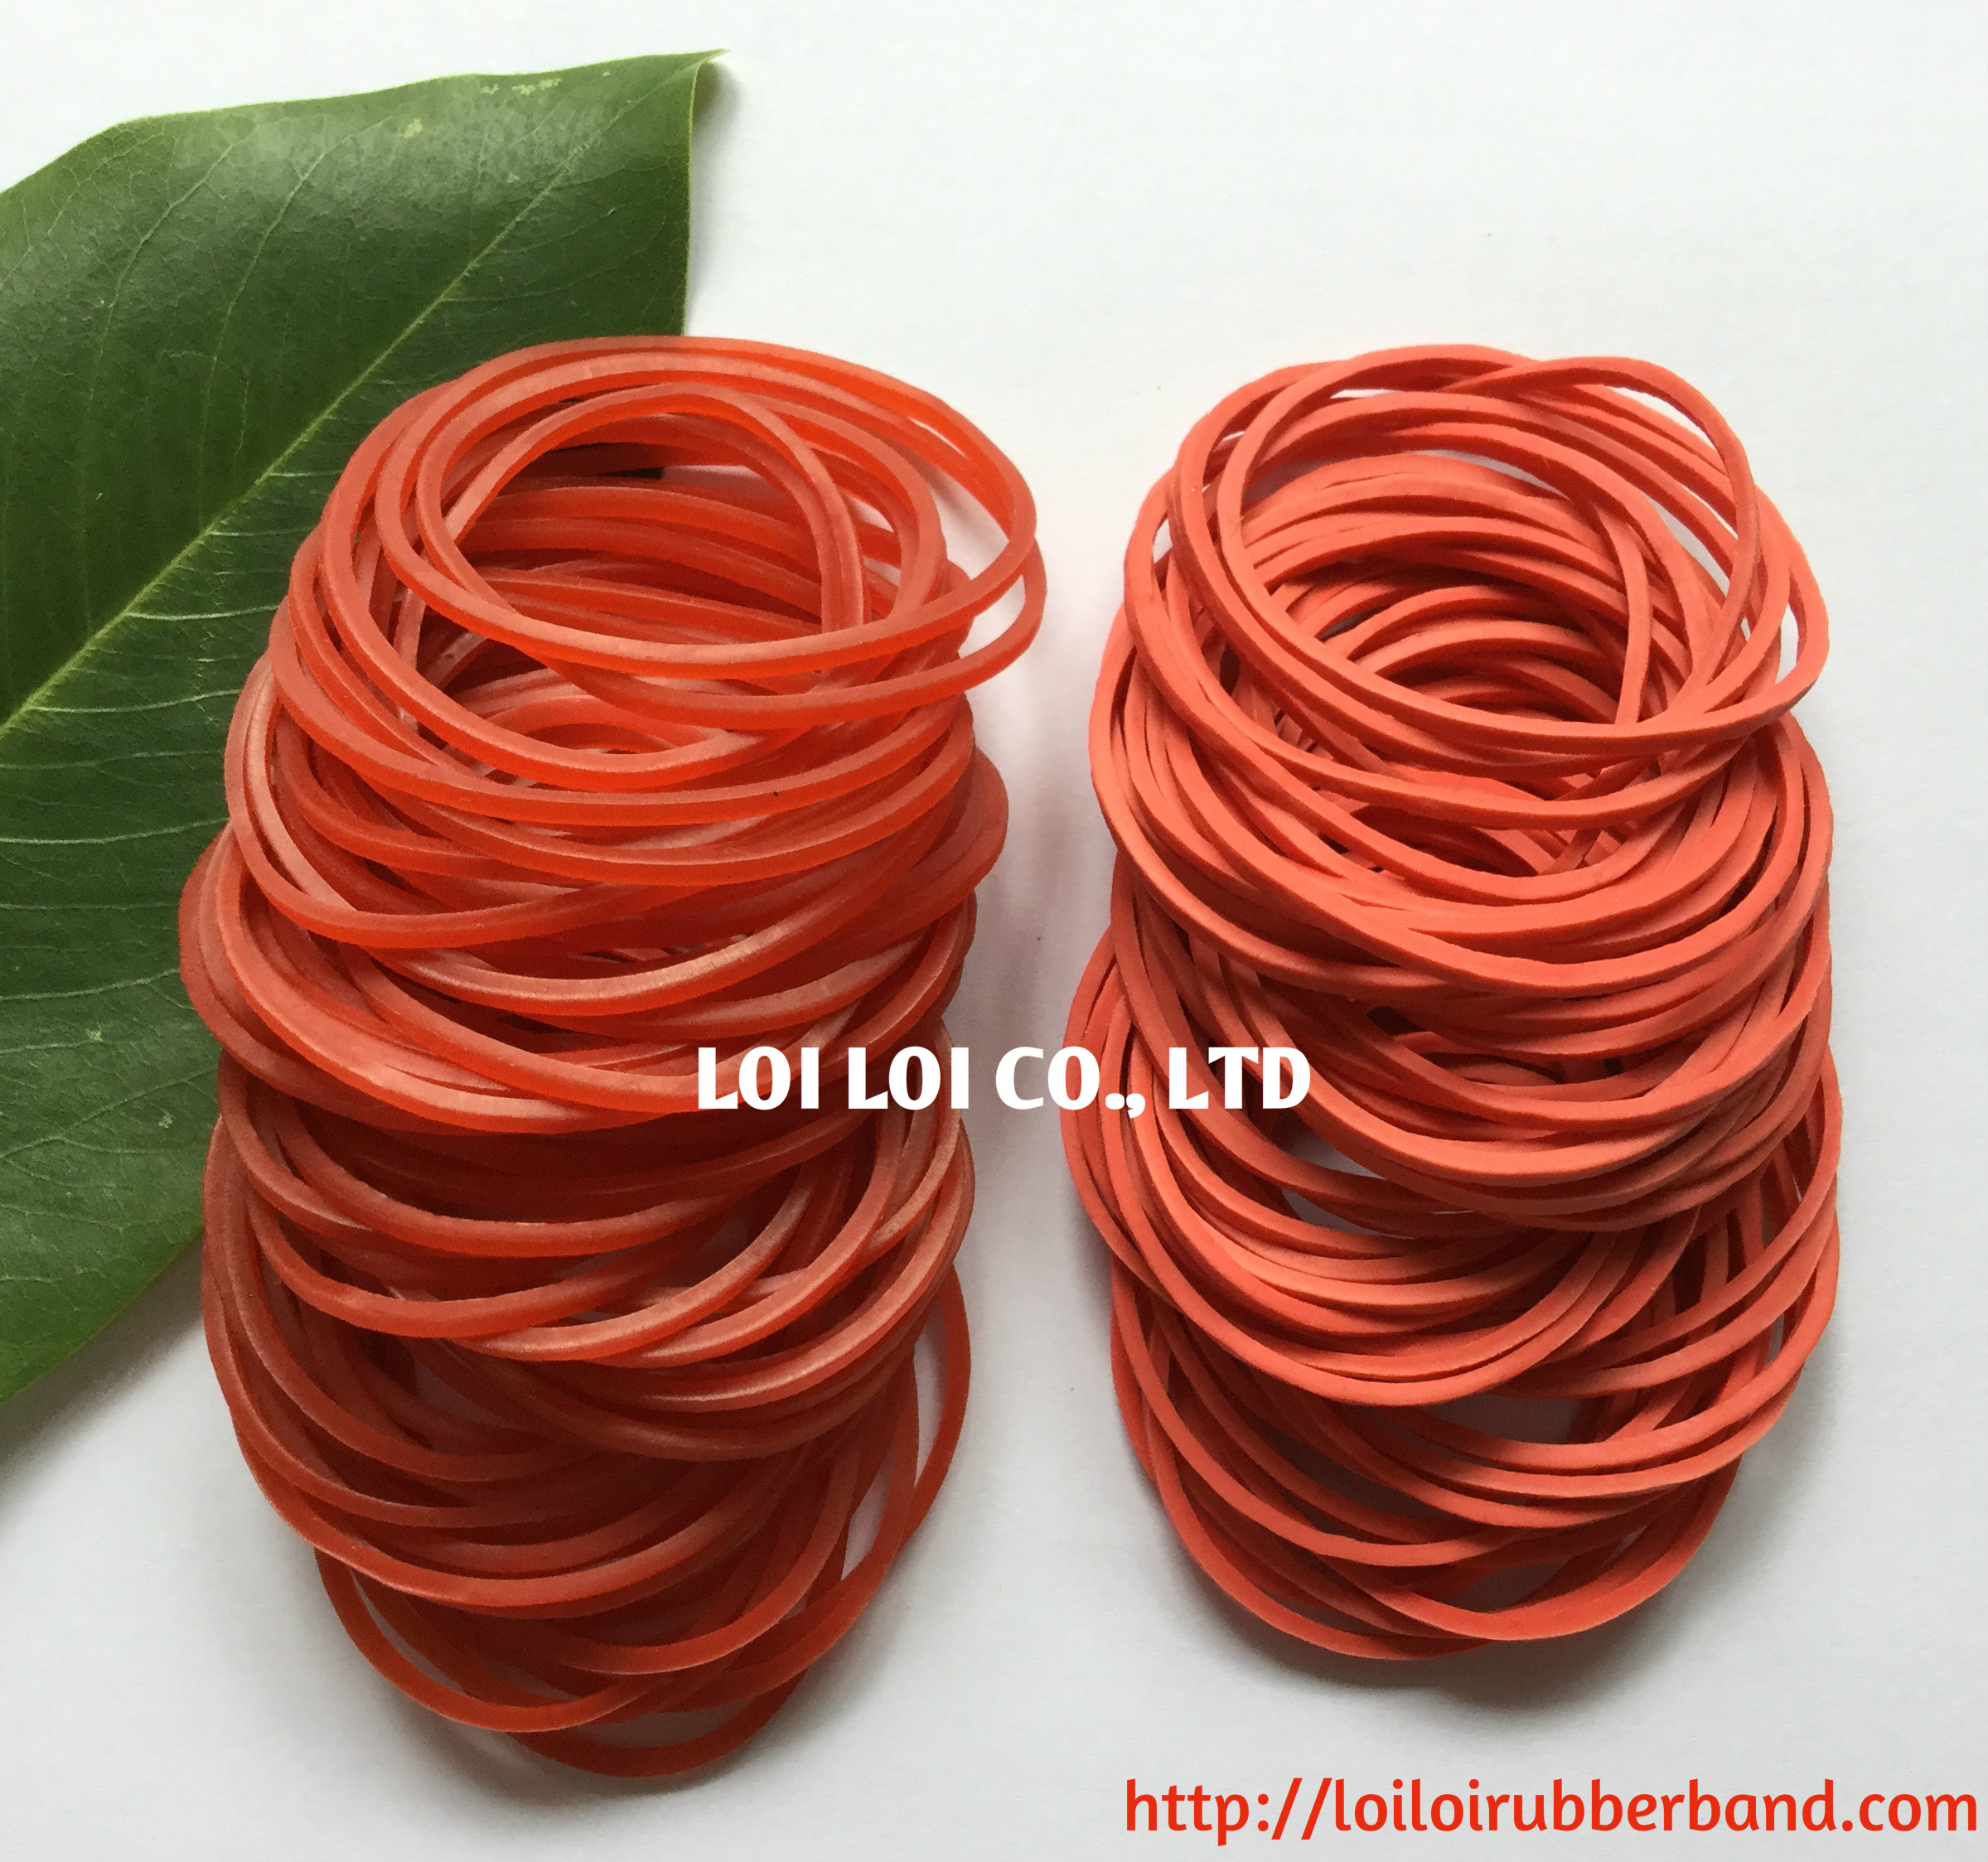 Red Colored Natural rubber band FREE Samples offering for Stationery & Office Use from Large Factory in Vietnam 